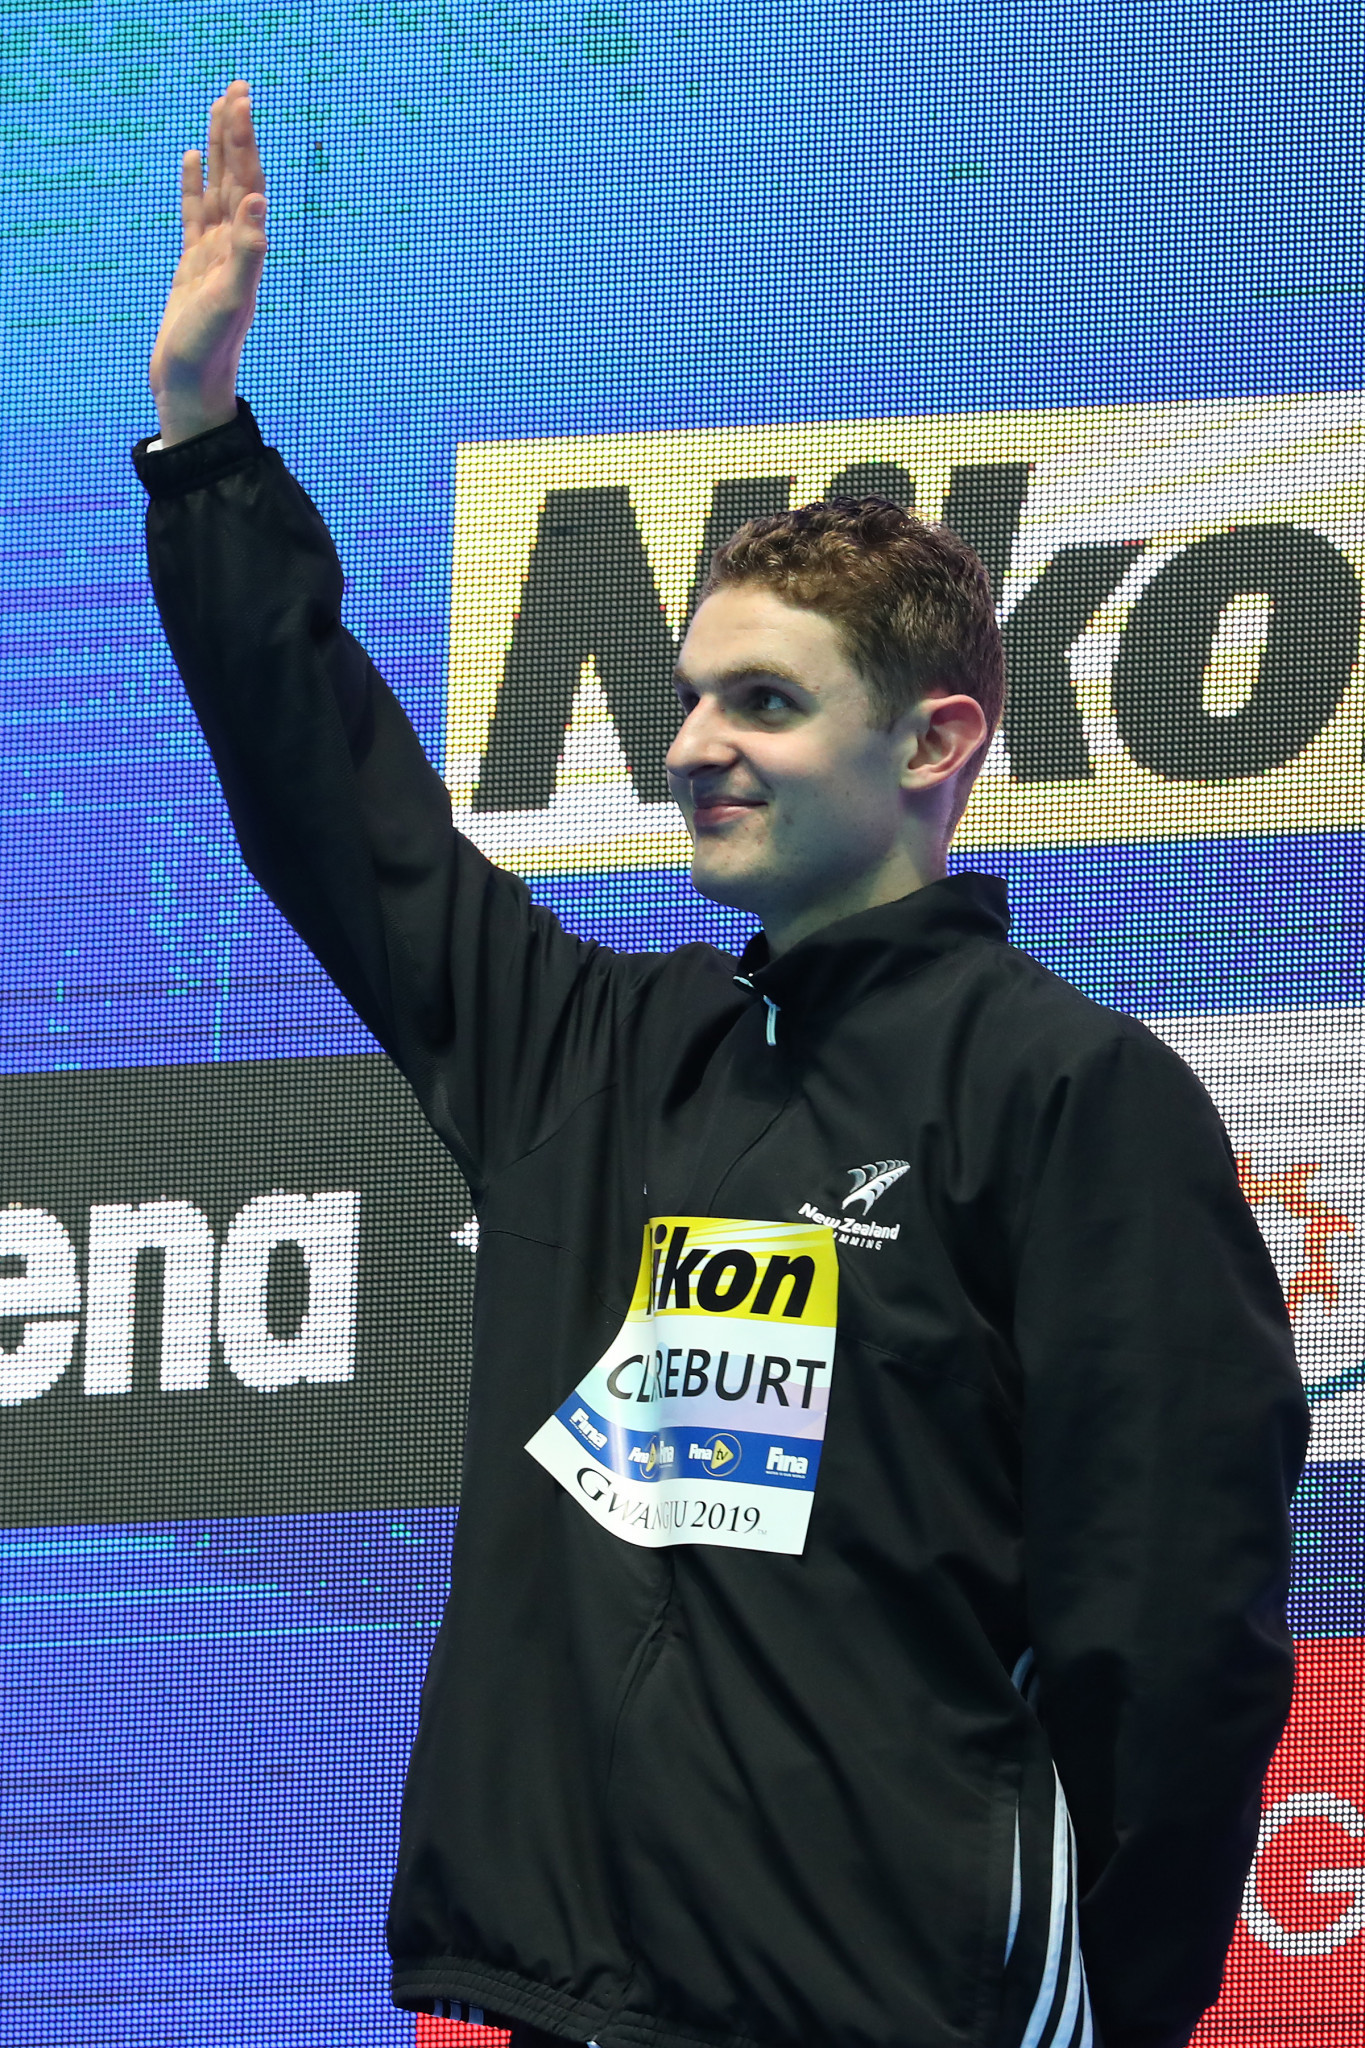 Lewis Clareburt set a New Zealand national record to win 400m individual medley bronze at the 2019 FINA World Championships in Gwanju ©Getty Images